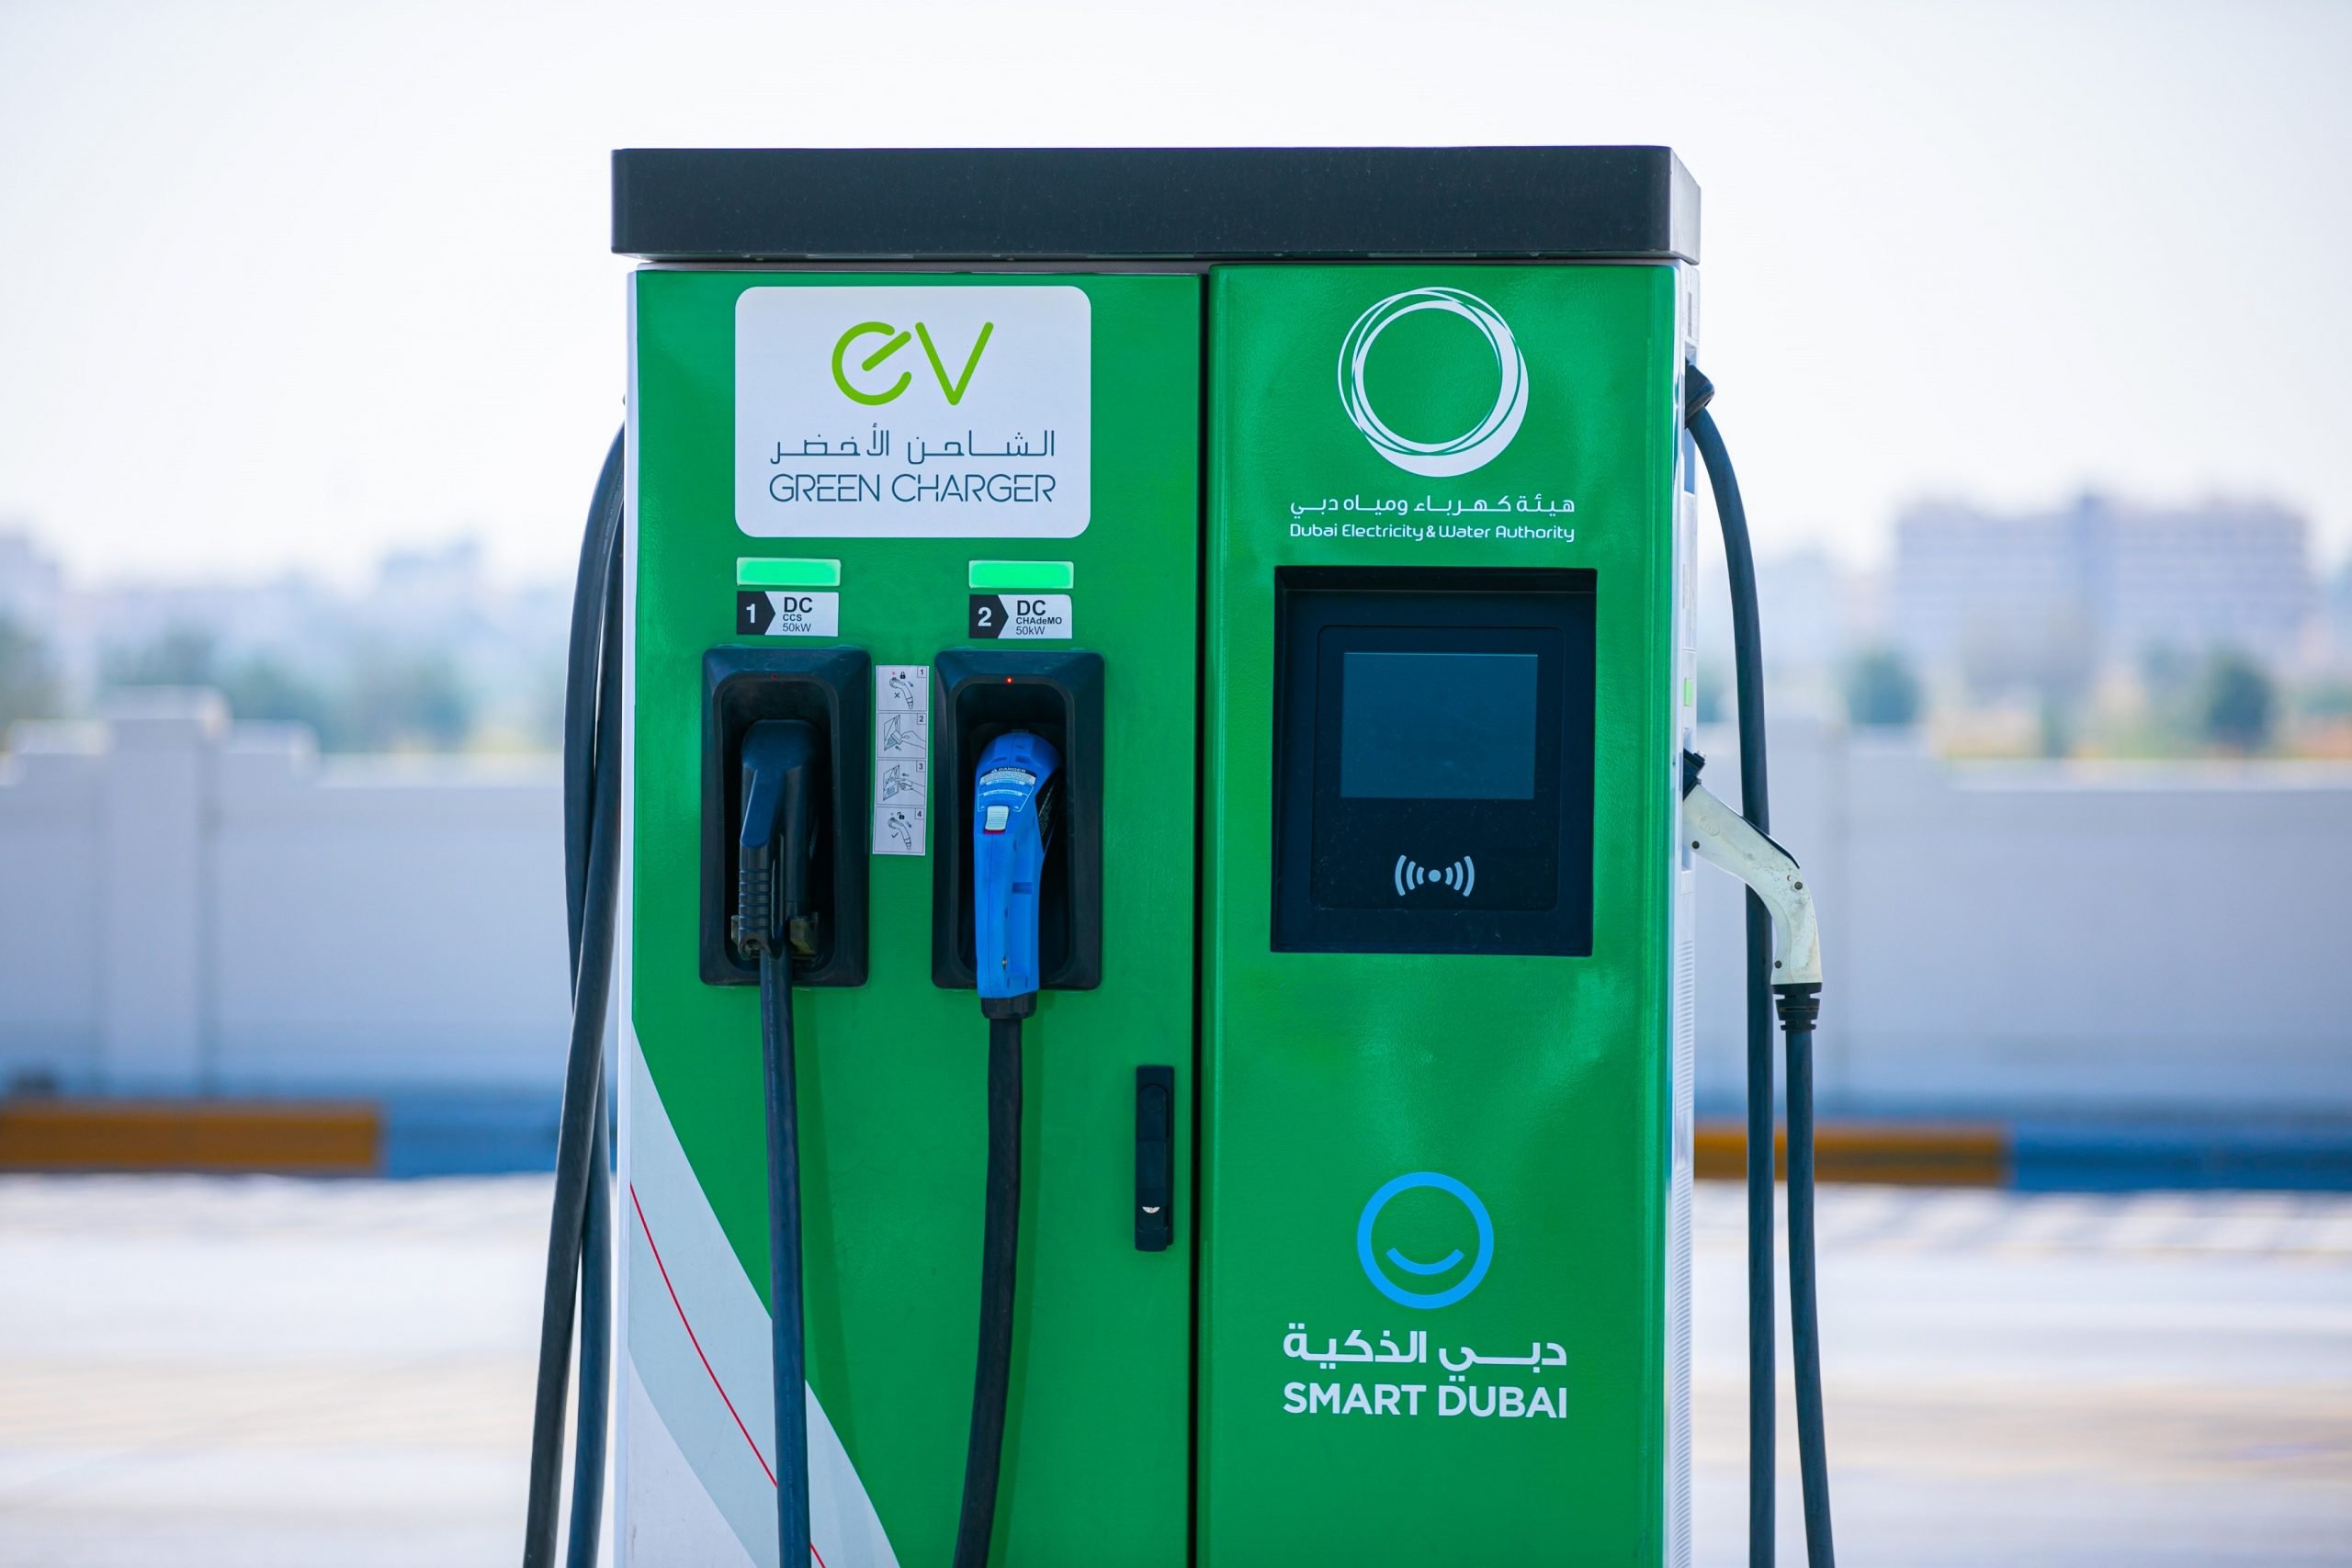 DEWA to provide free charging to electric vehicles in